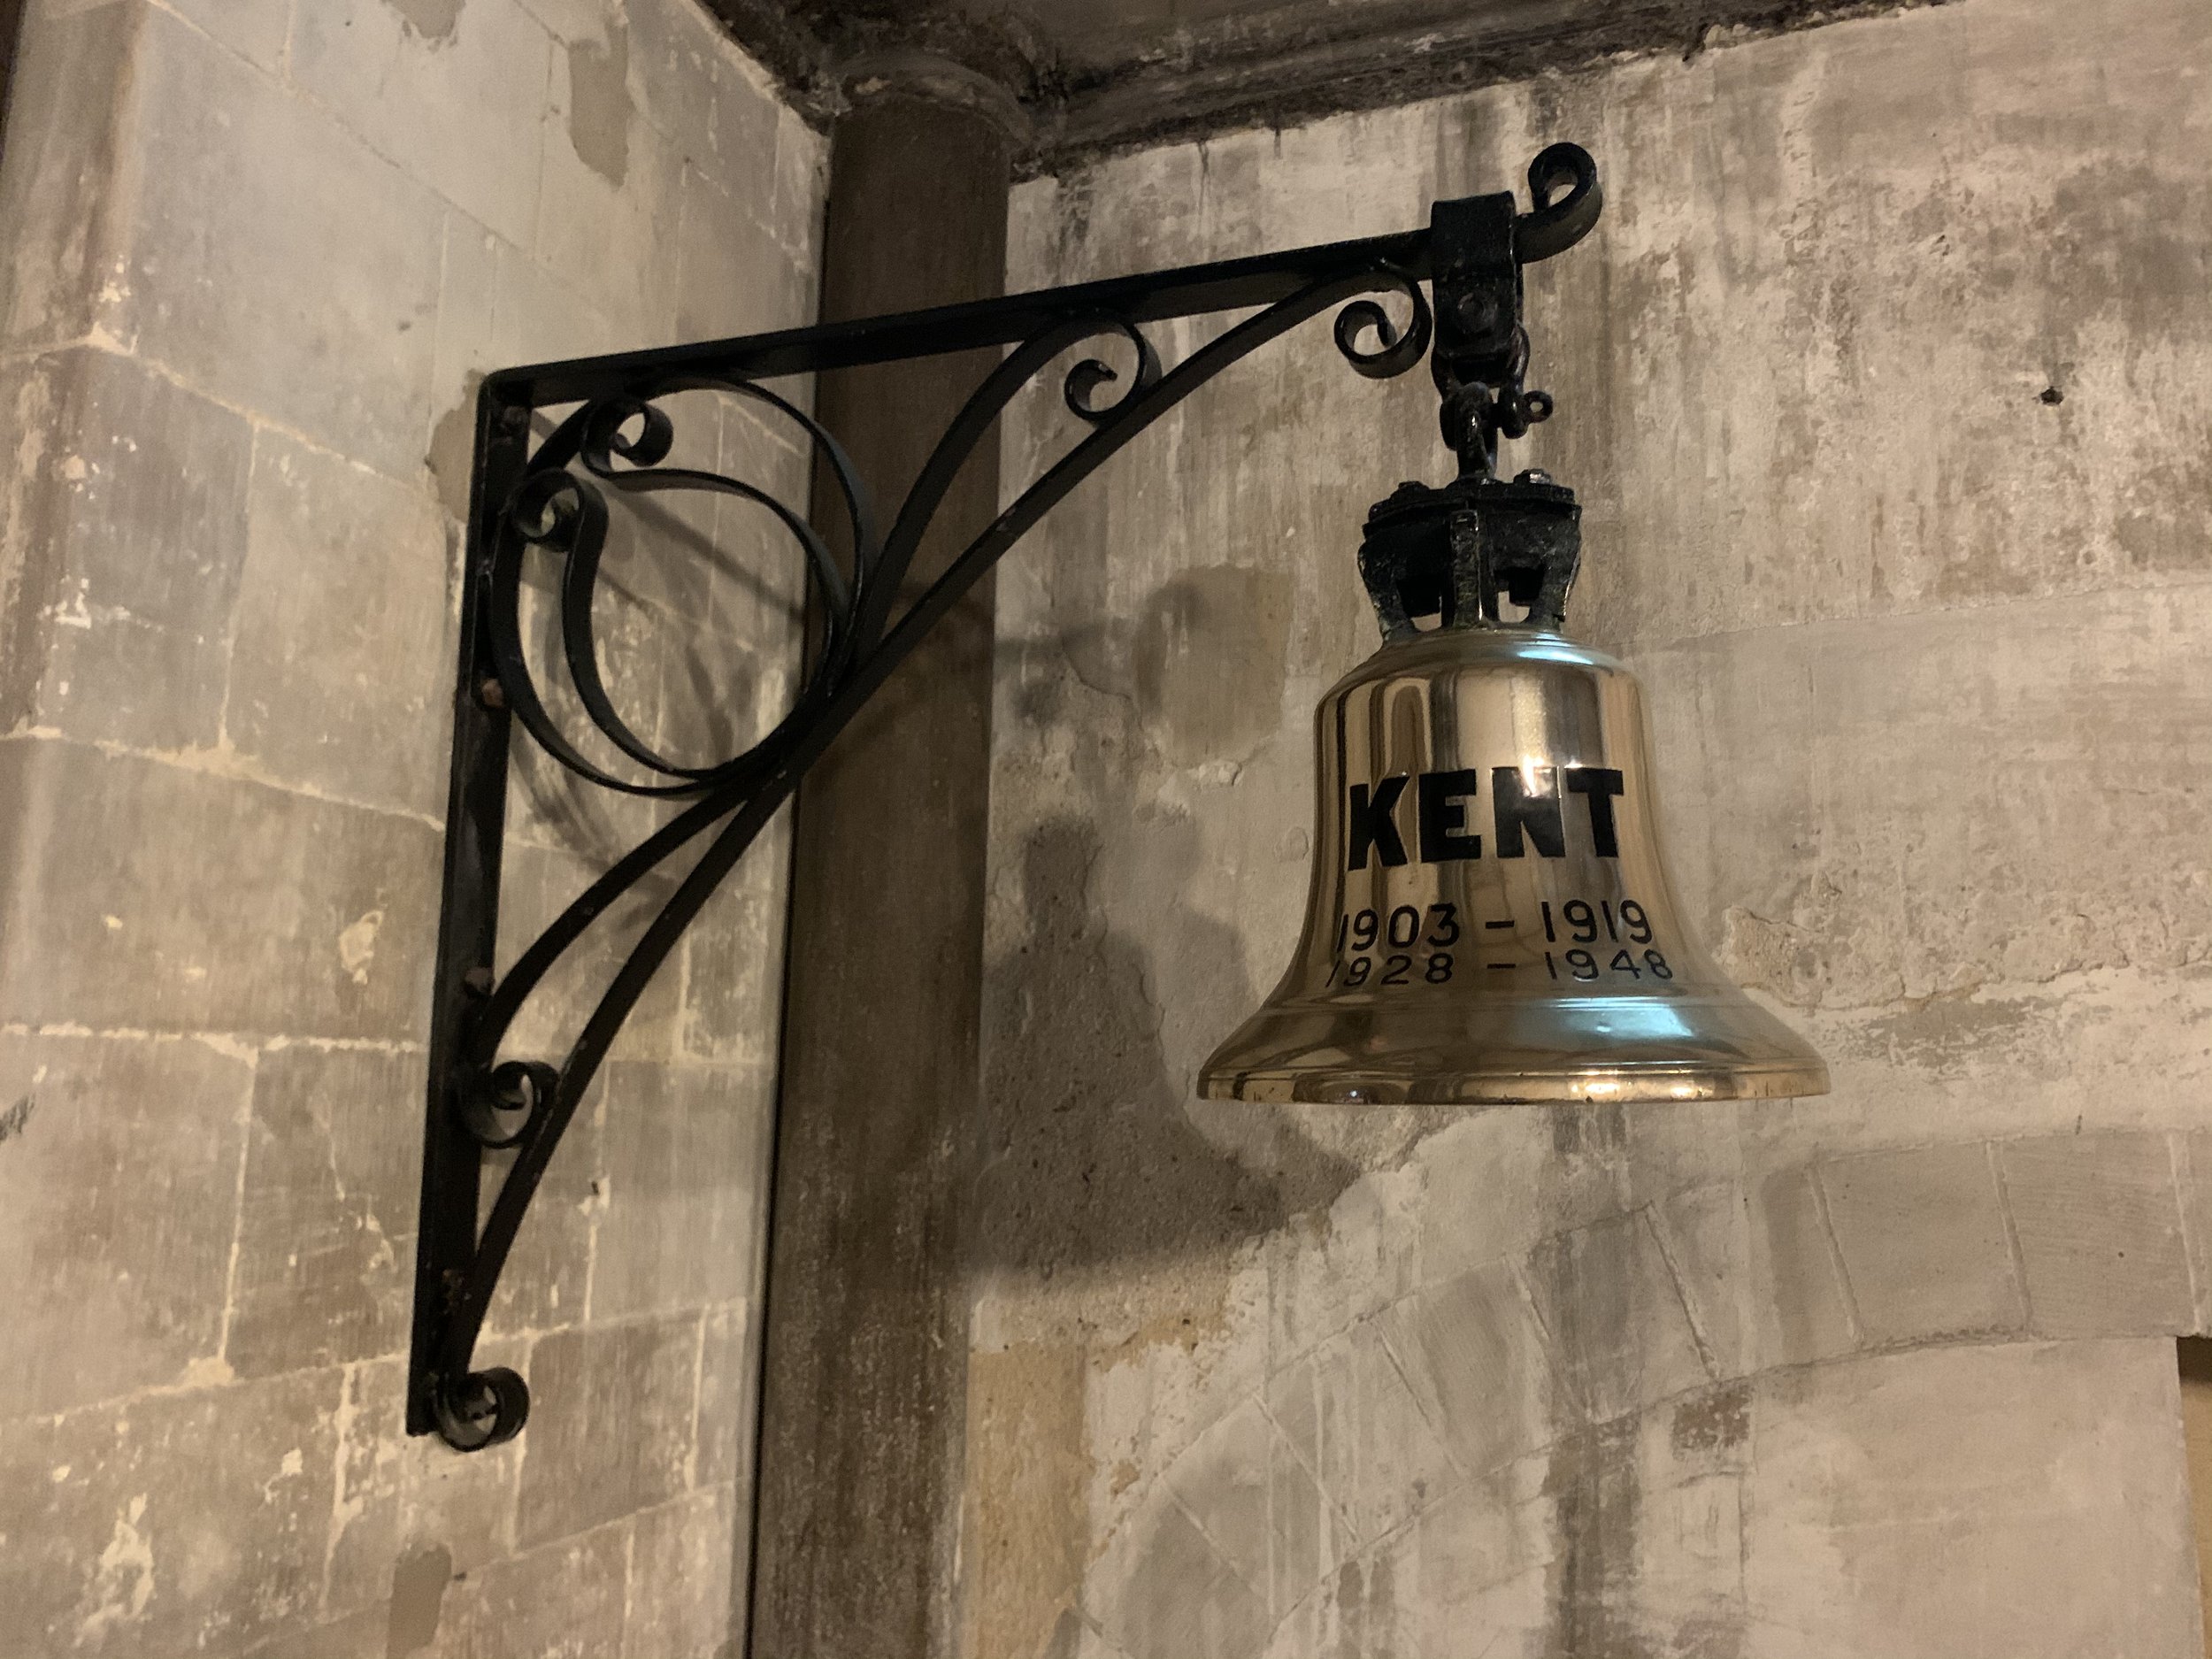 Photograph of the ship bell of HMS Kent in the South Quire Aisle.